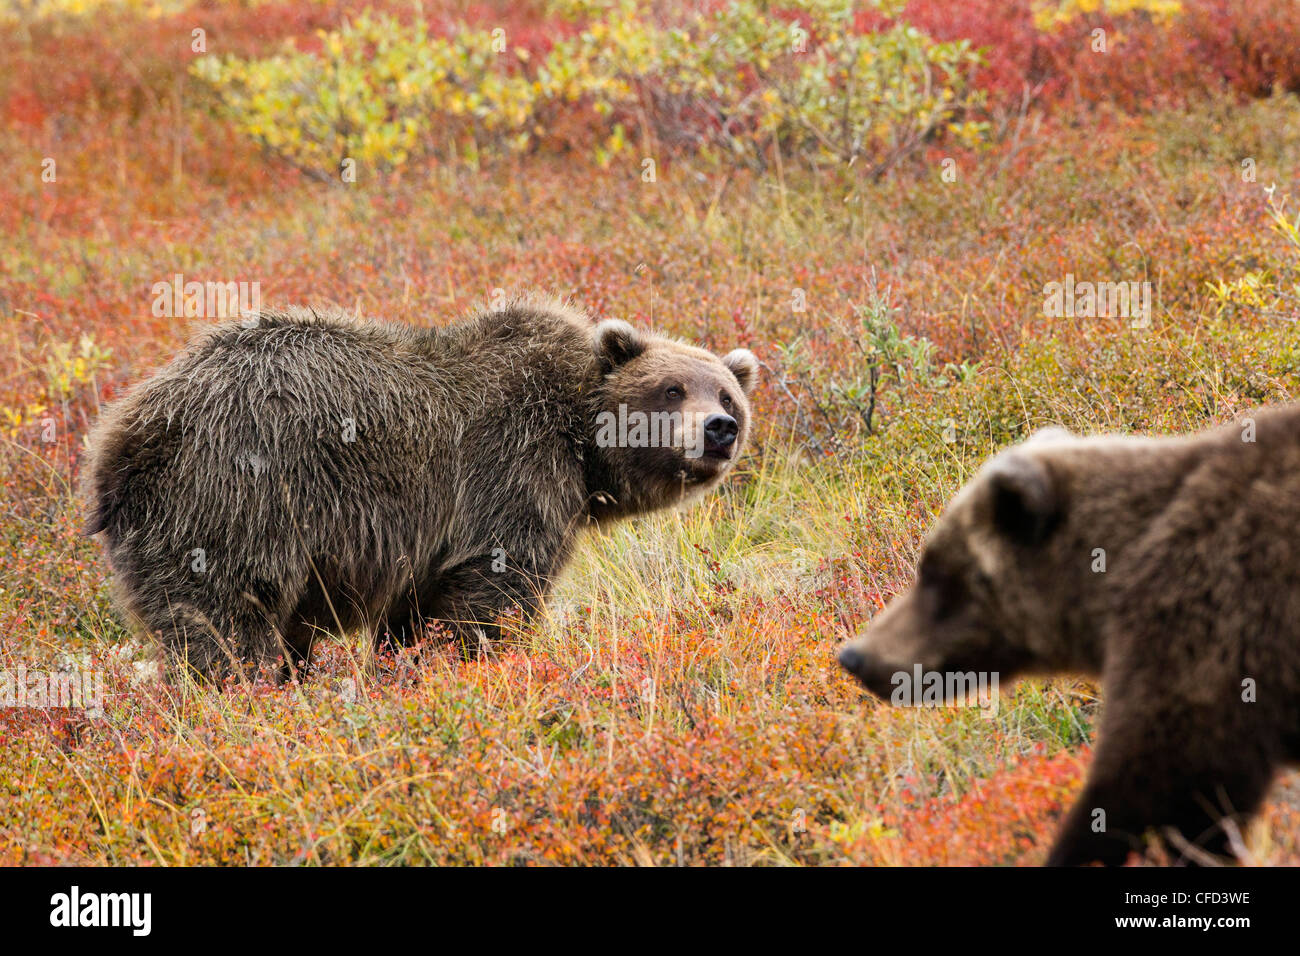 Grizzly bear (Ursus arctos horribills), in fall colour, Denali National Park, Alaska, United States of America Stock Photo